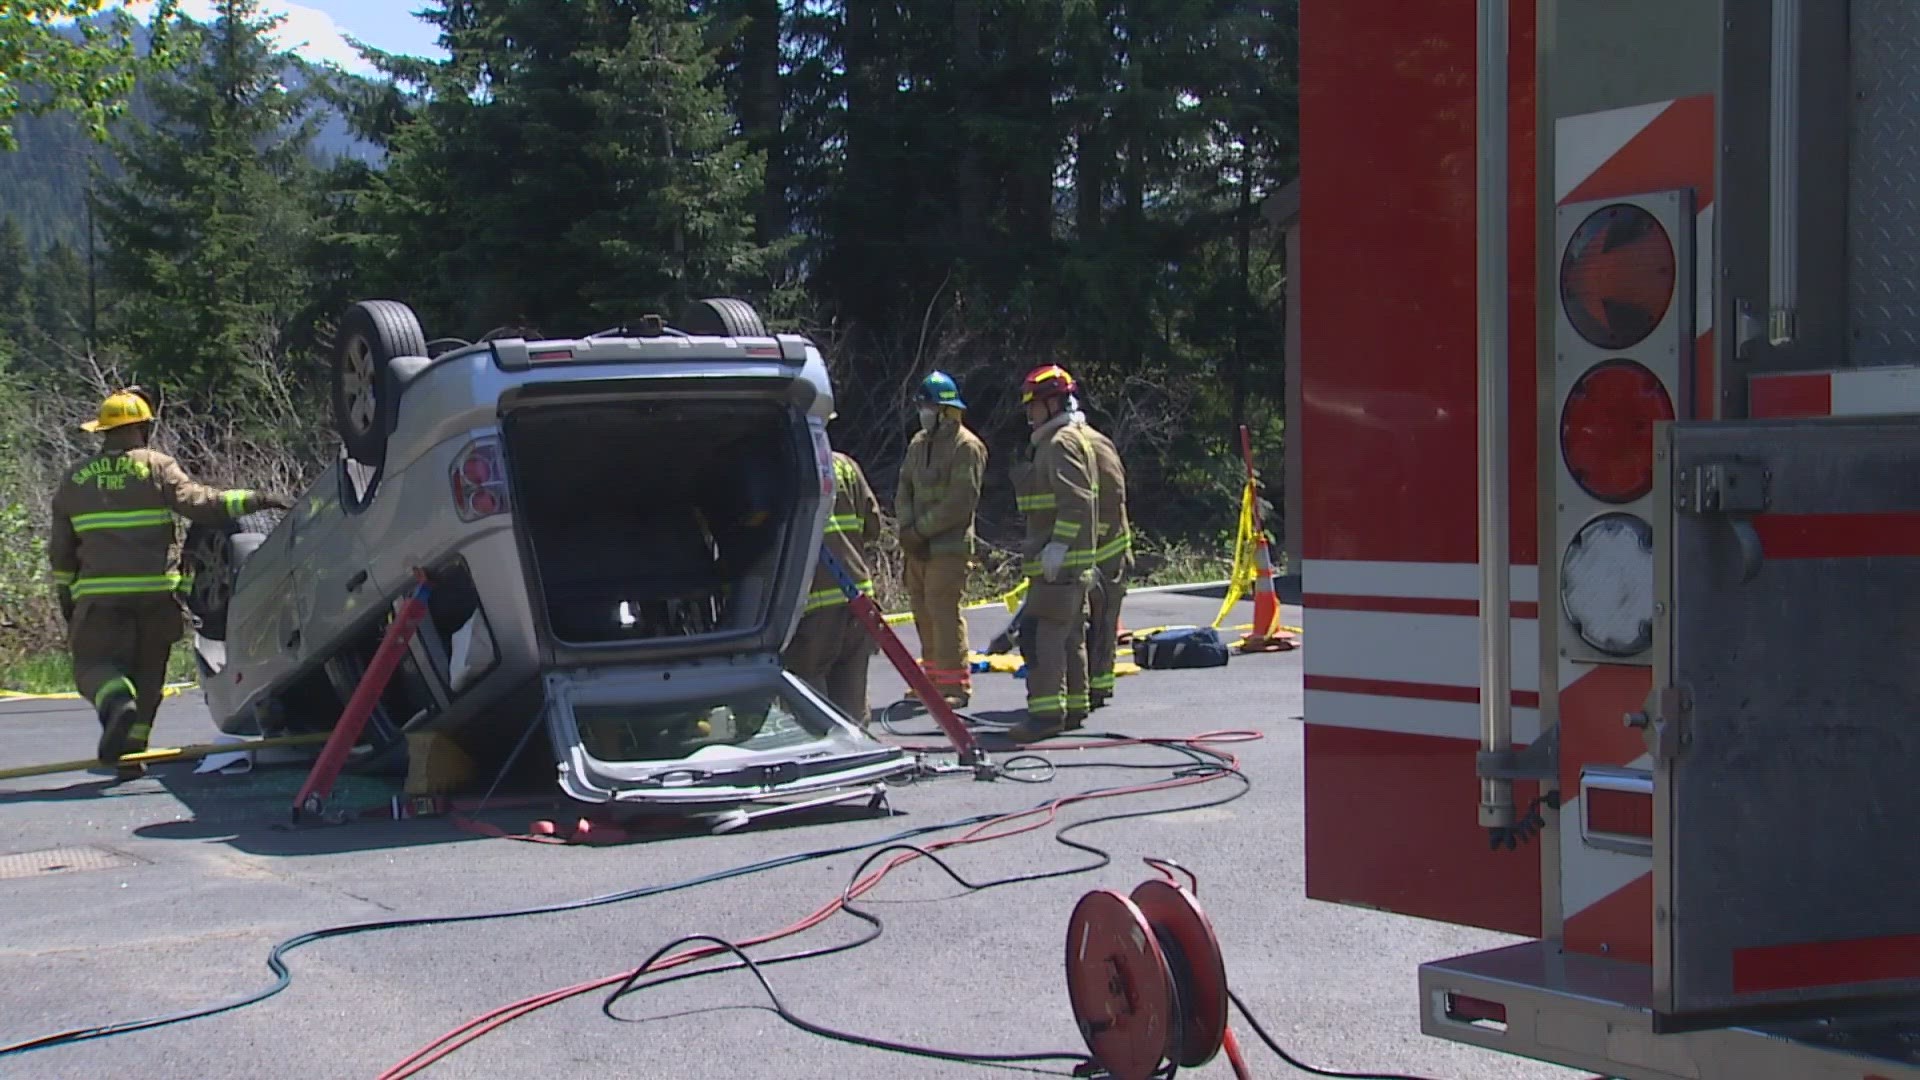 Snoqualmie Pass Fire and Rescue held an extrication training to prepare for crashes that involve their crews having to cut people out of cars.